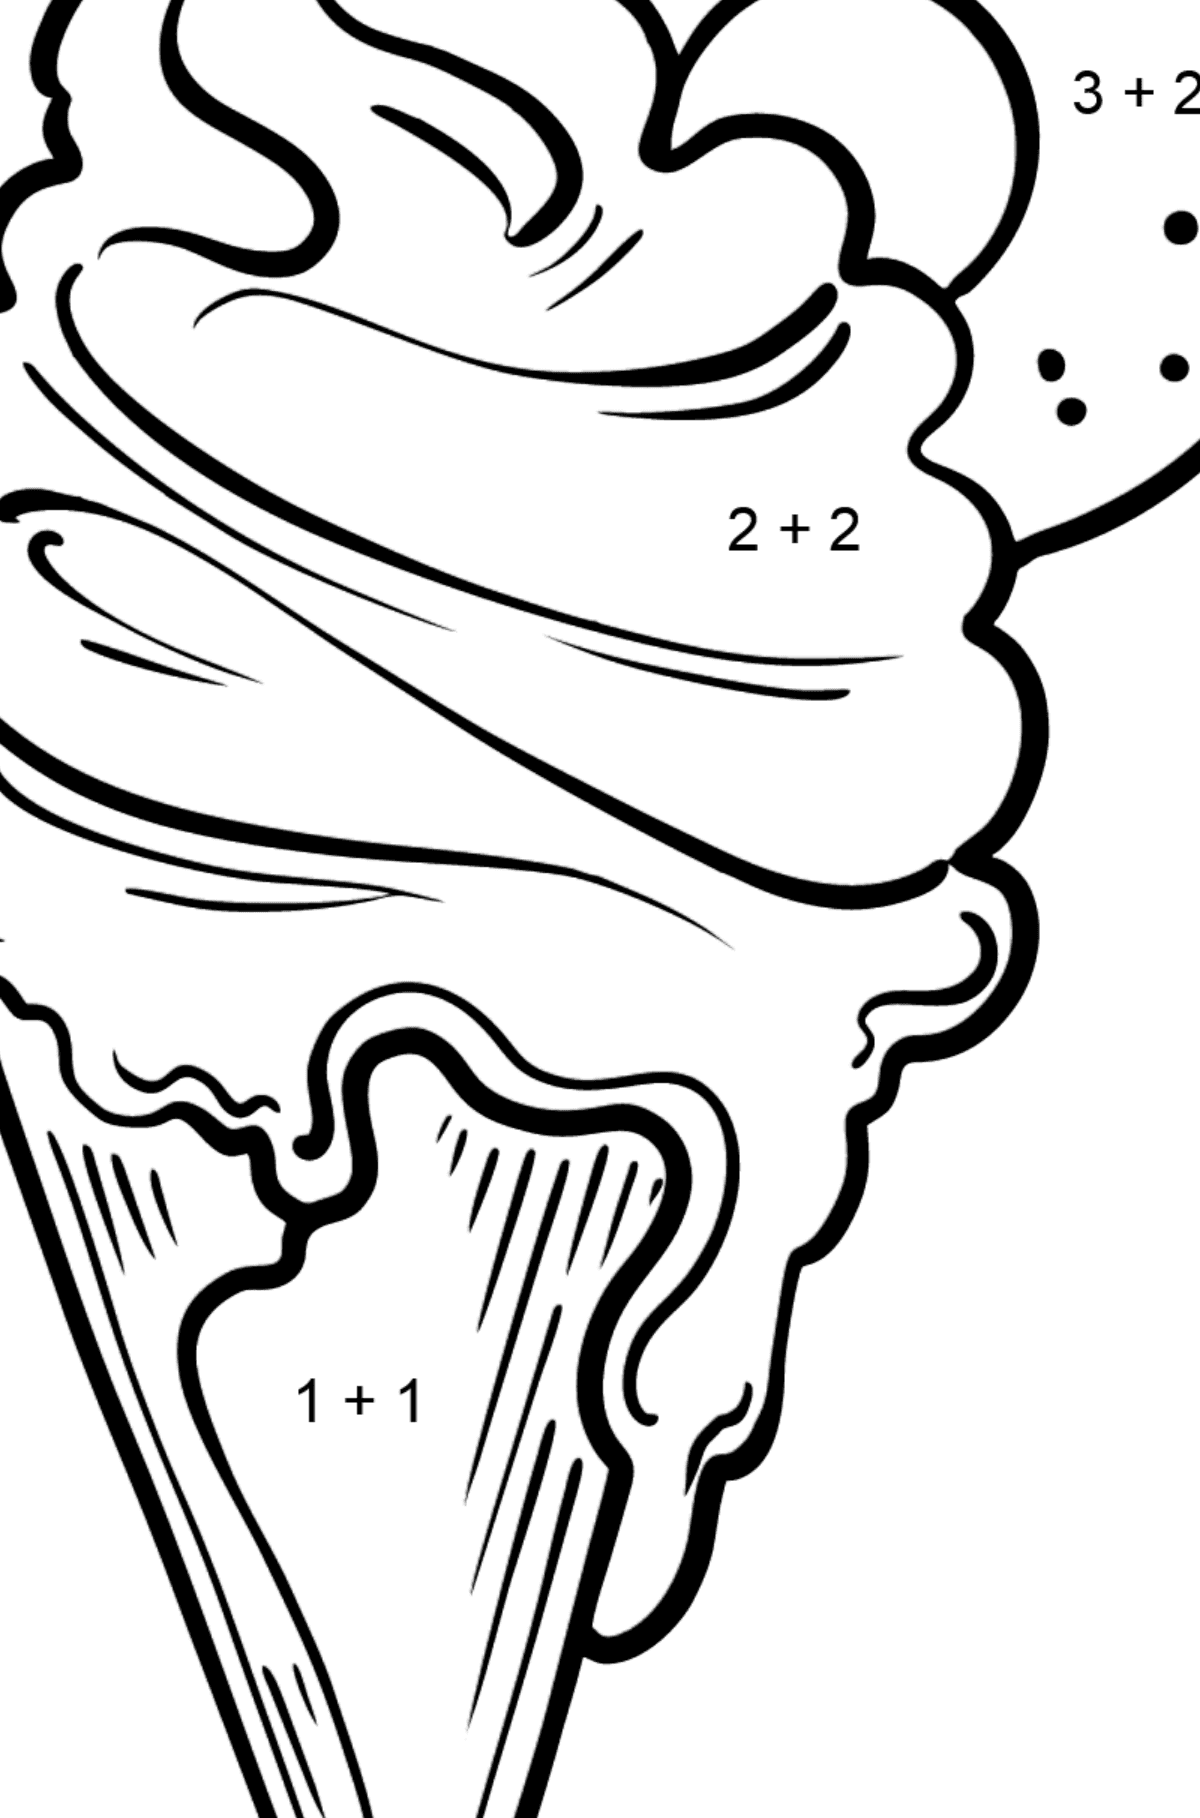 Ice Cream Cone and Pink Lollipop coloring page - Math Coloring - Addition for Kids